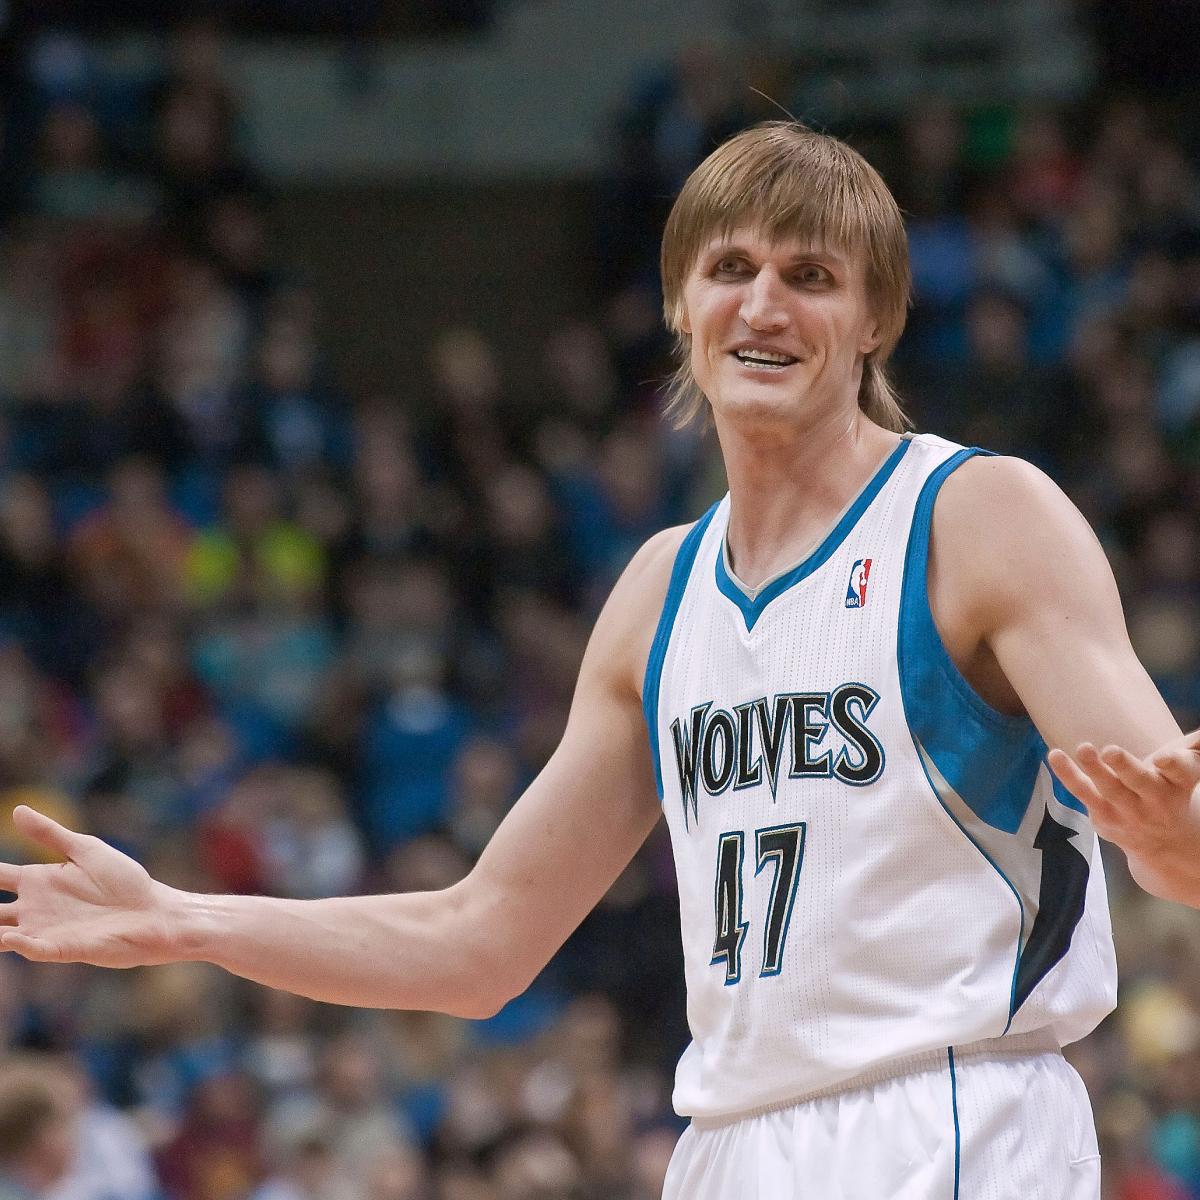 Andrei Kirilenko isn't 'pissed' about last year, he's hopeful for this year  - NetsDaily